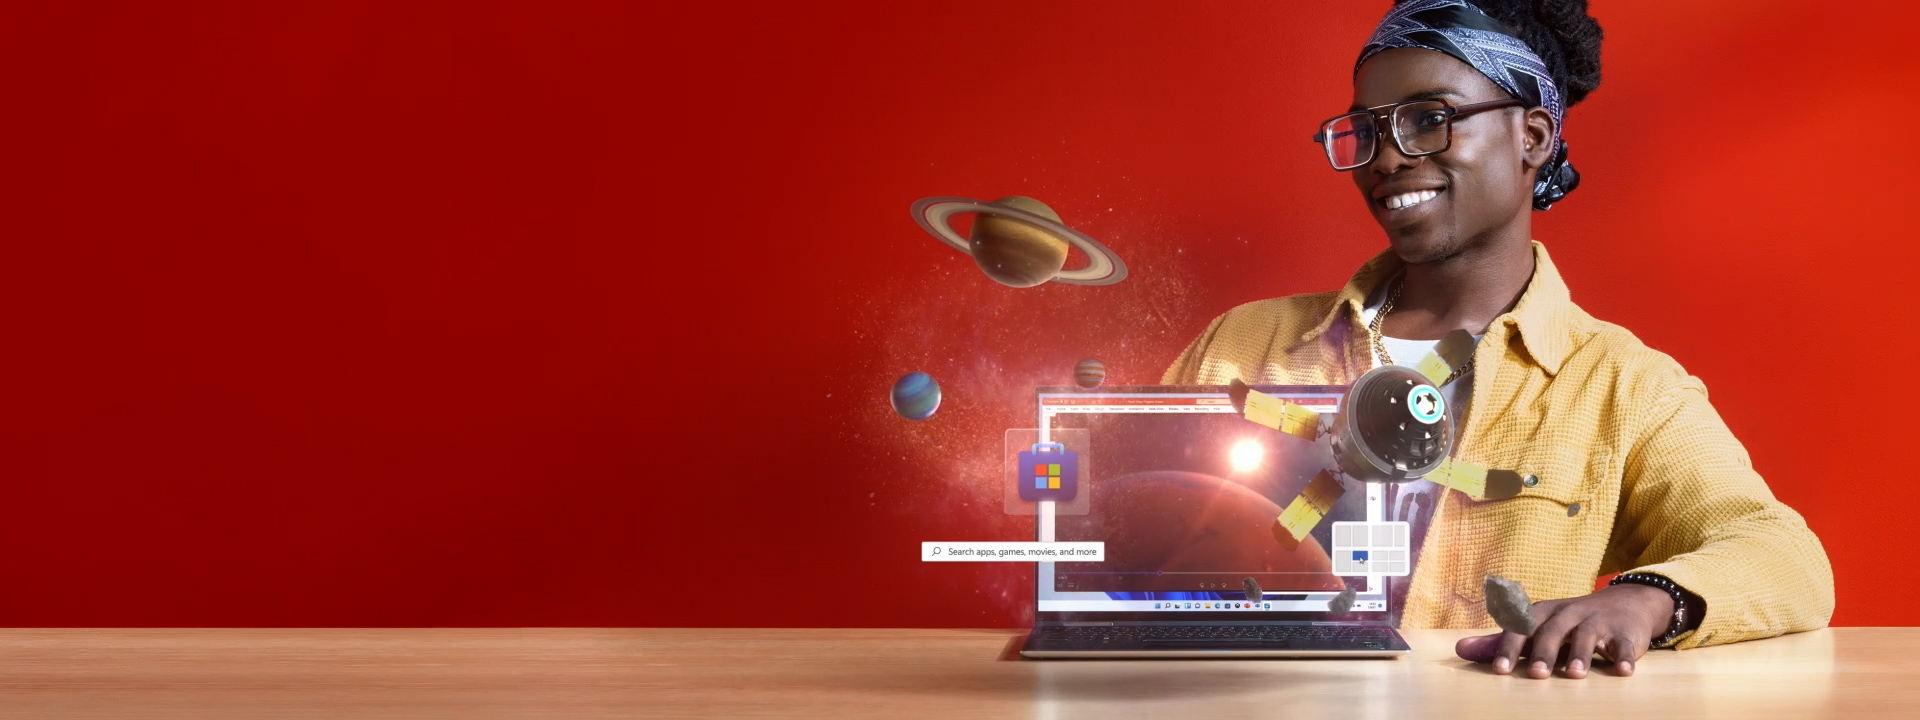 A man sitting down behind a laptop with floating illustrated planets and satellite